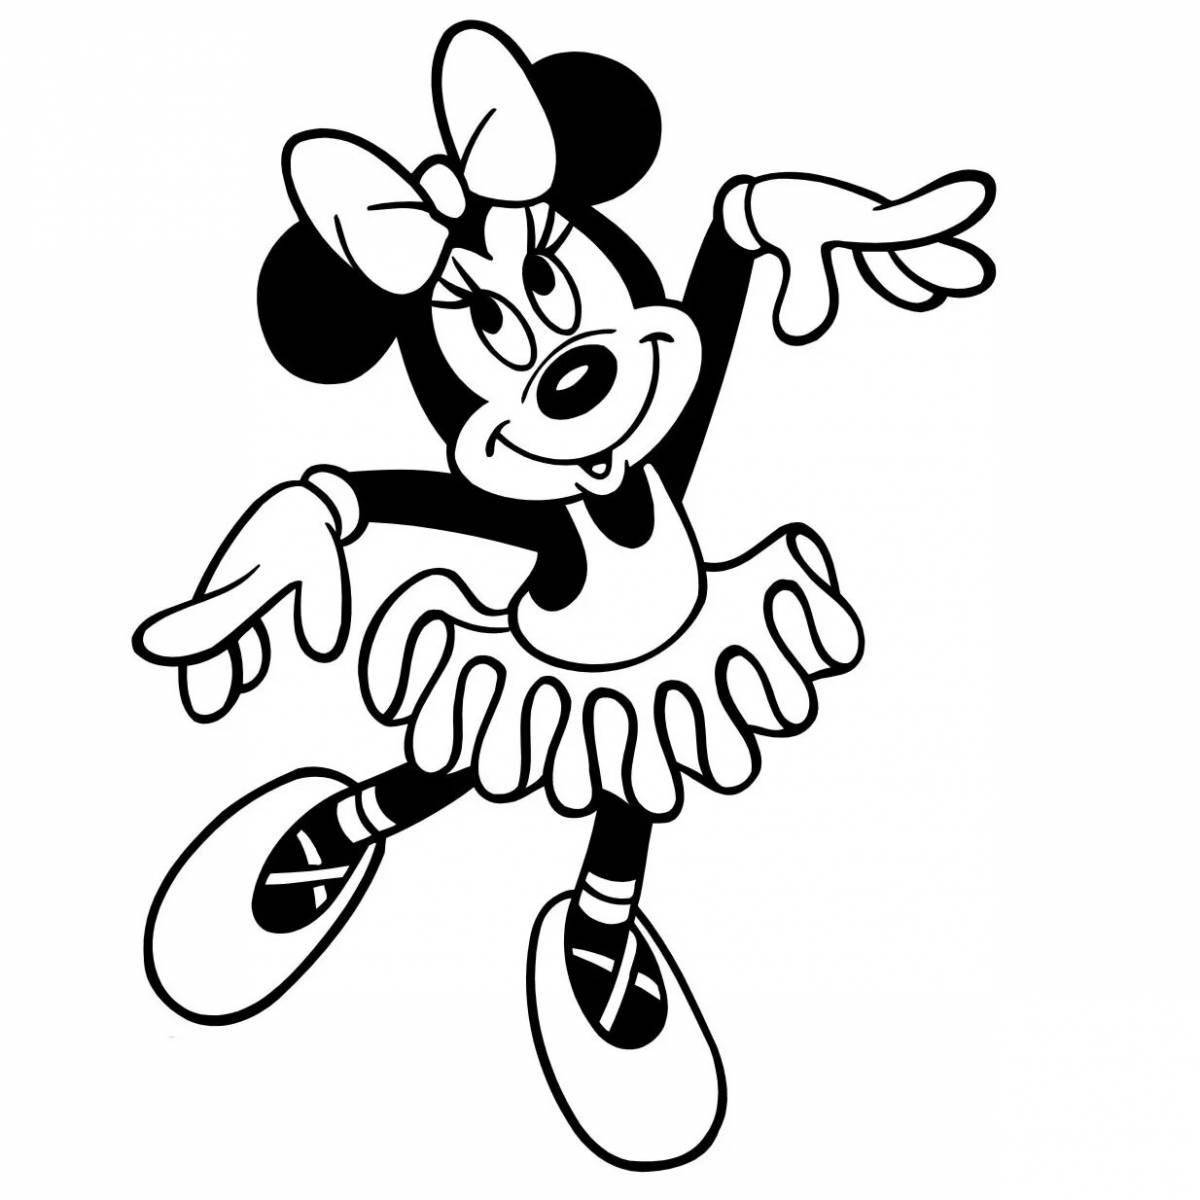 Minnie mouse magic coloring book for kids